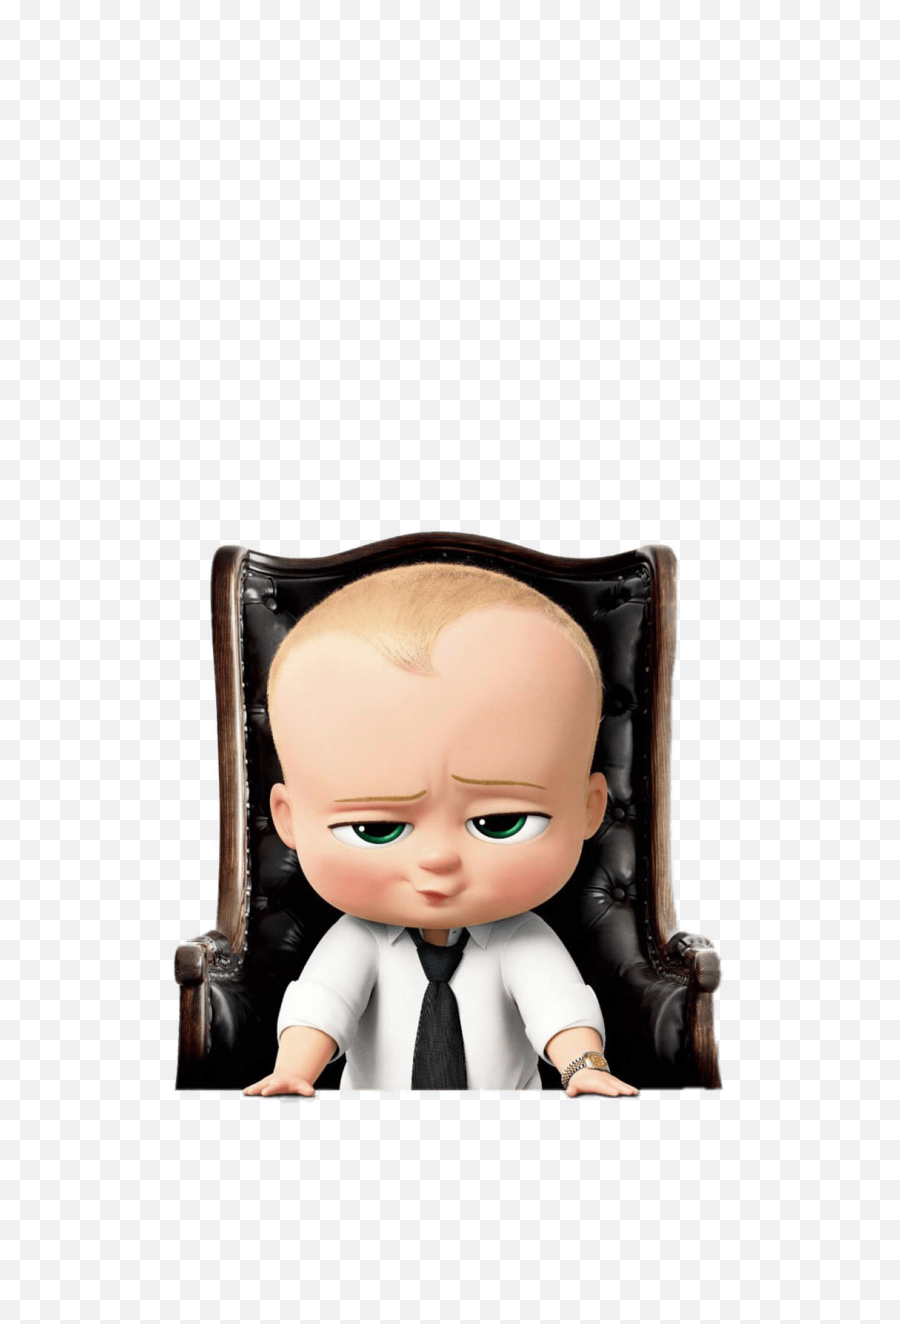 Boss Baby In Desk Chair Transparent Png - Born Leader Boss Baby,Boss Baby Transparent